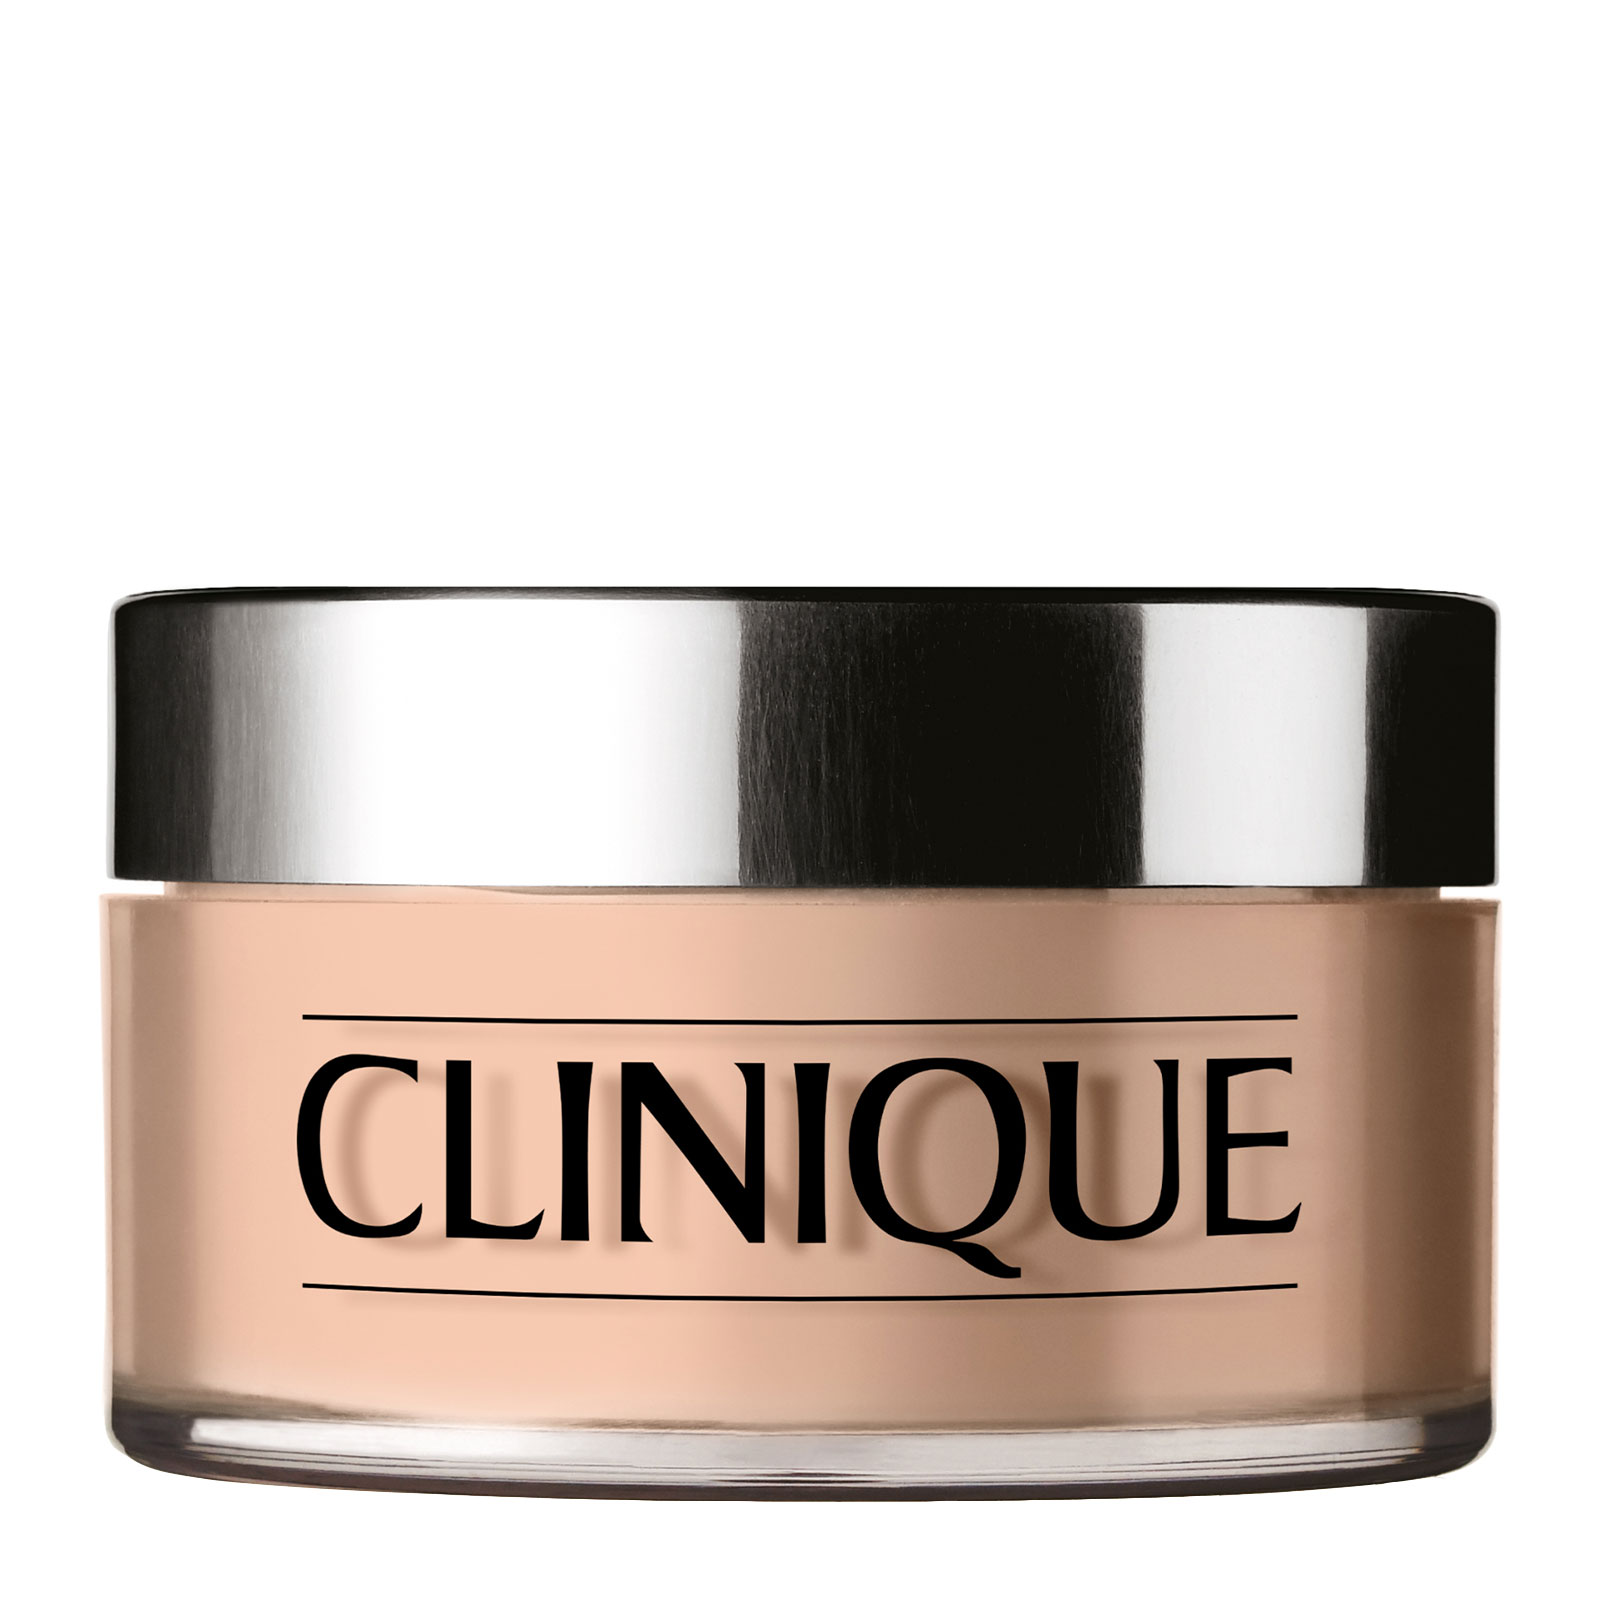 Clinique Blended Face Powder 25G Transparency 4